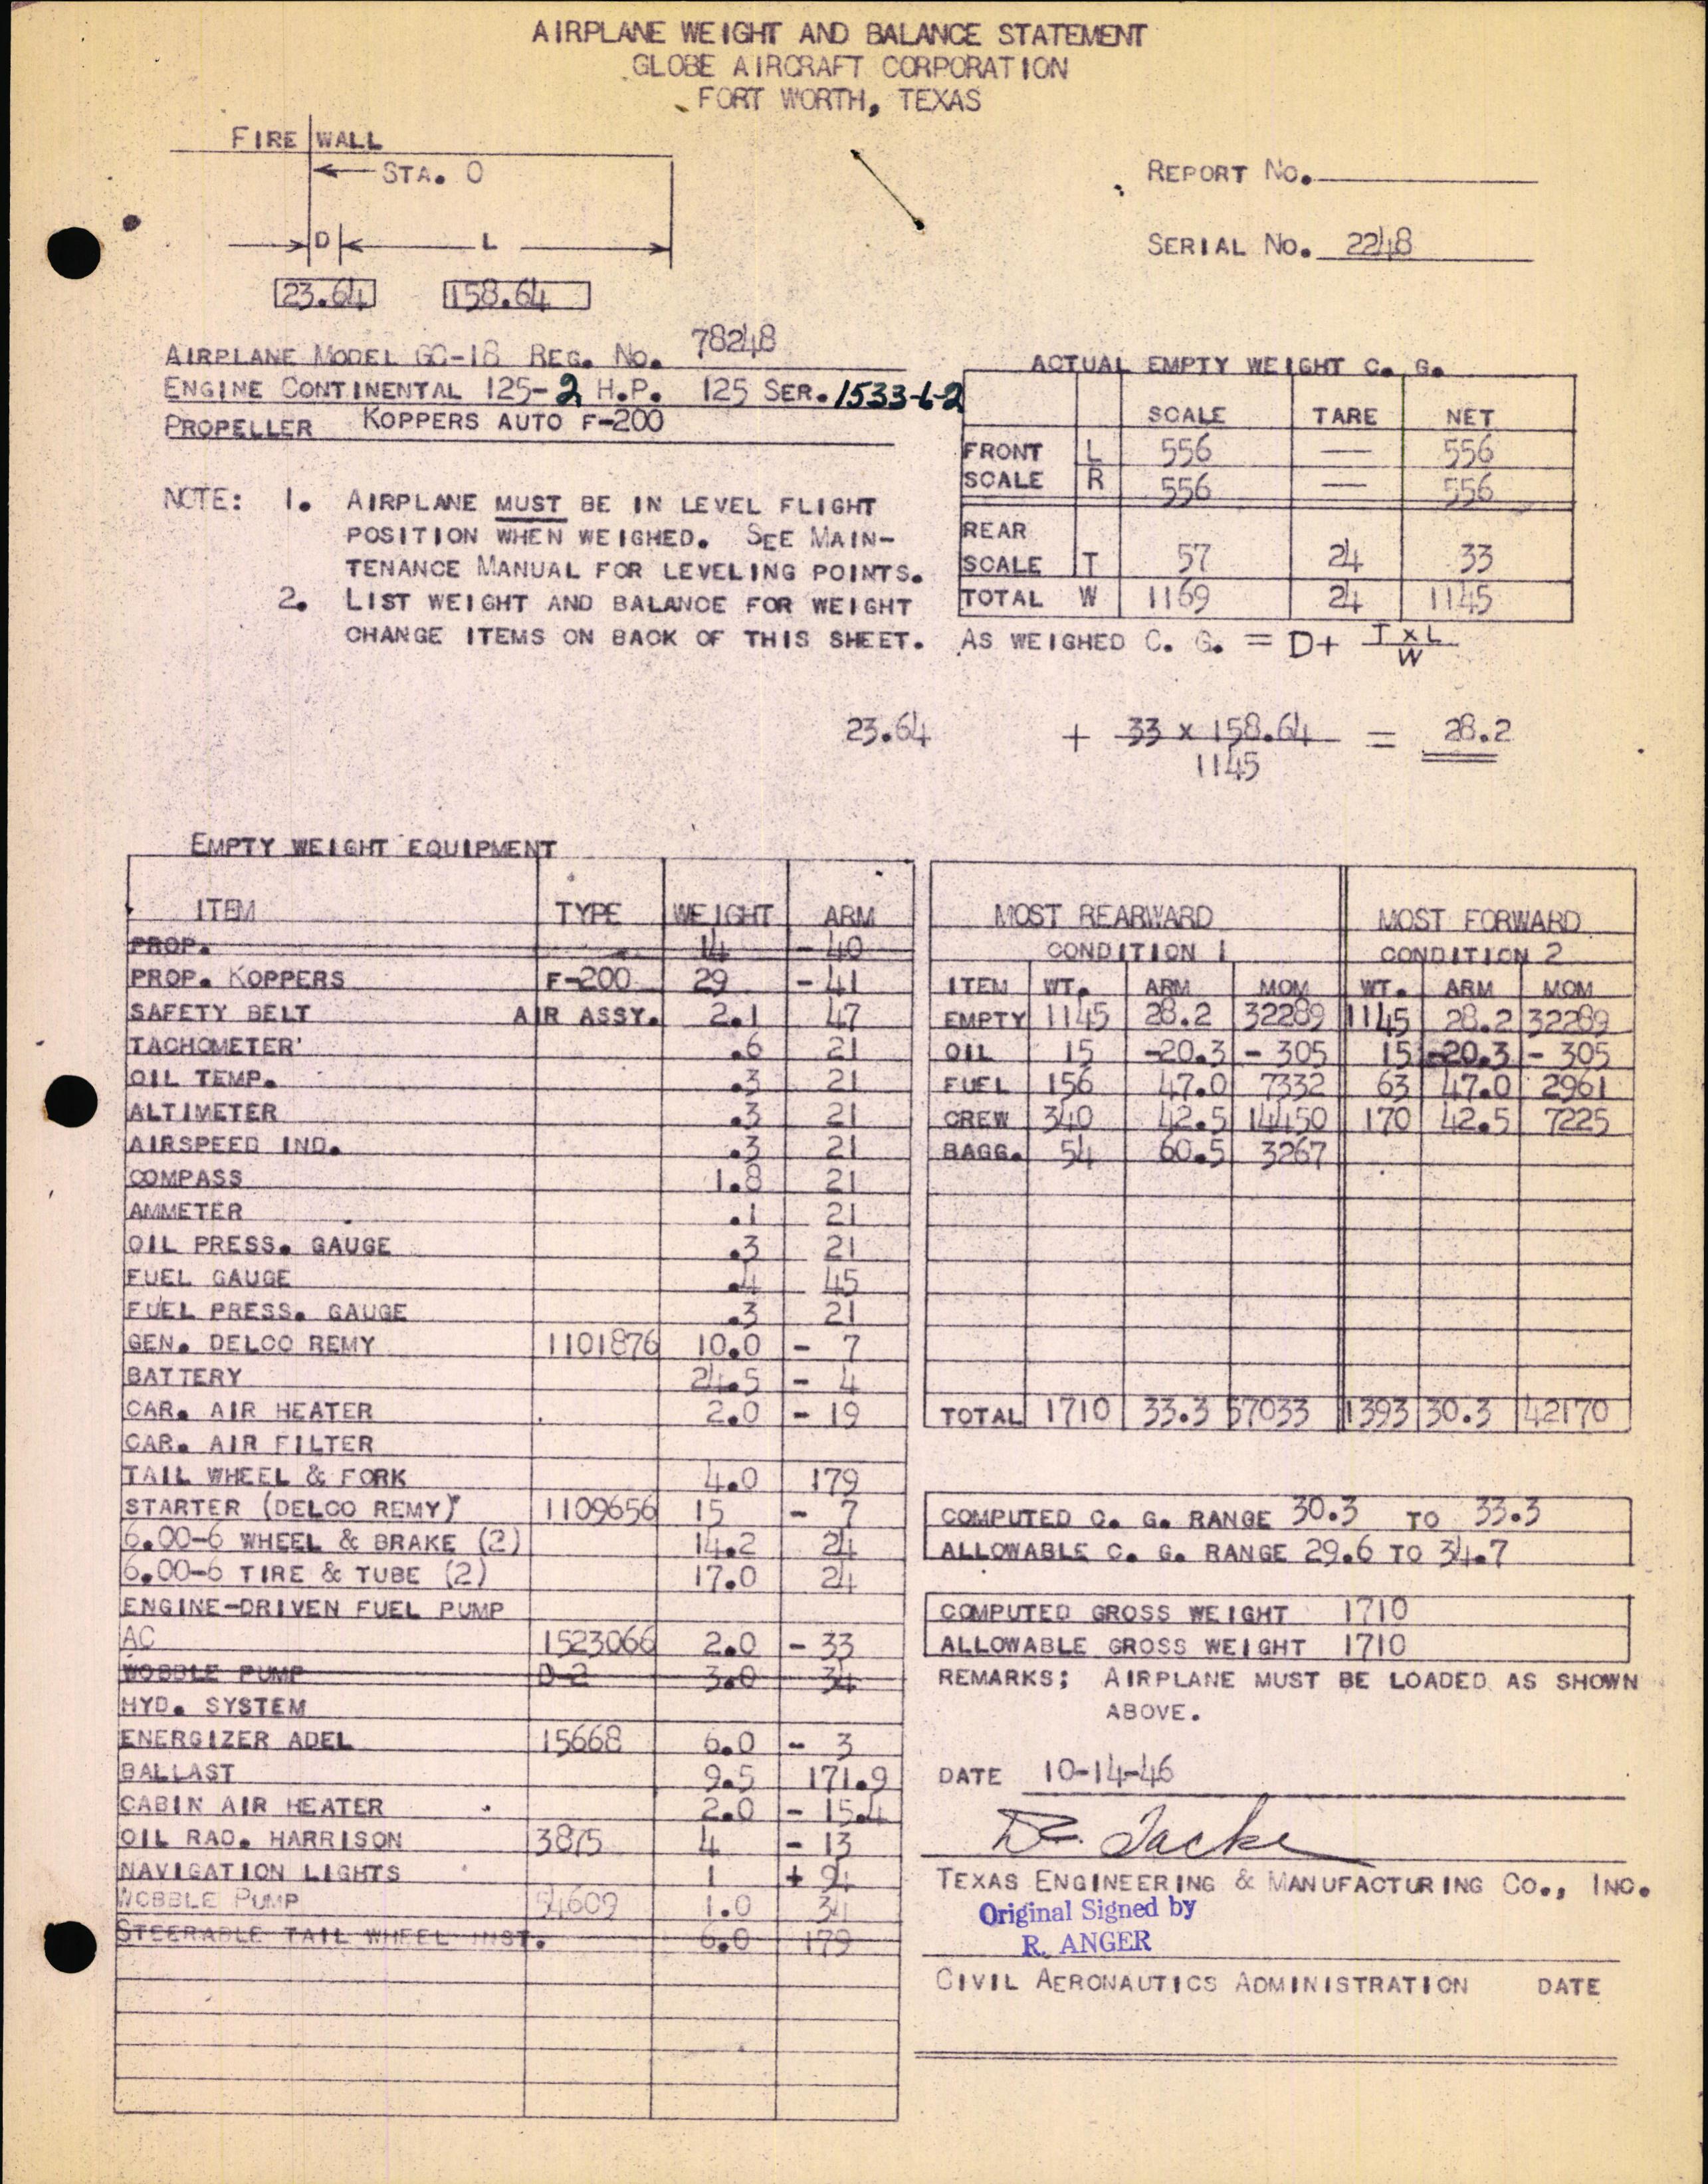 Sample page 1 from AirCorps Library document: Technical Information for Serial Number 2248